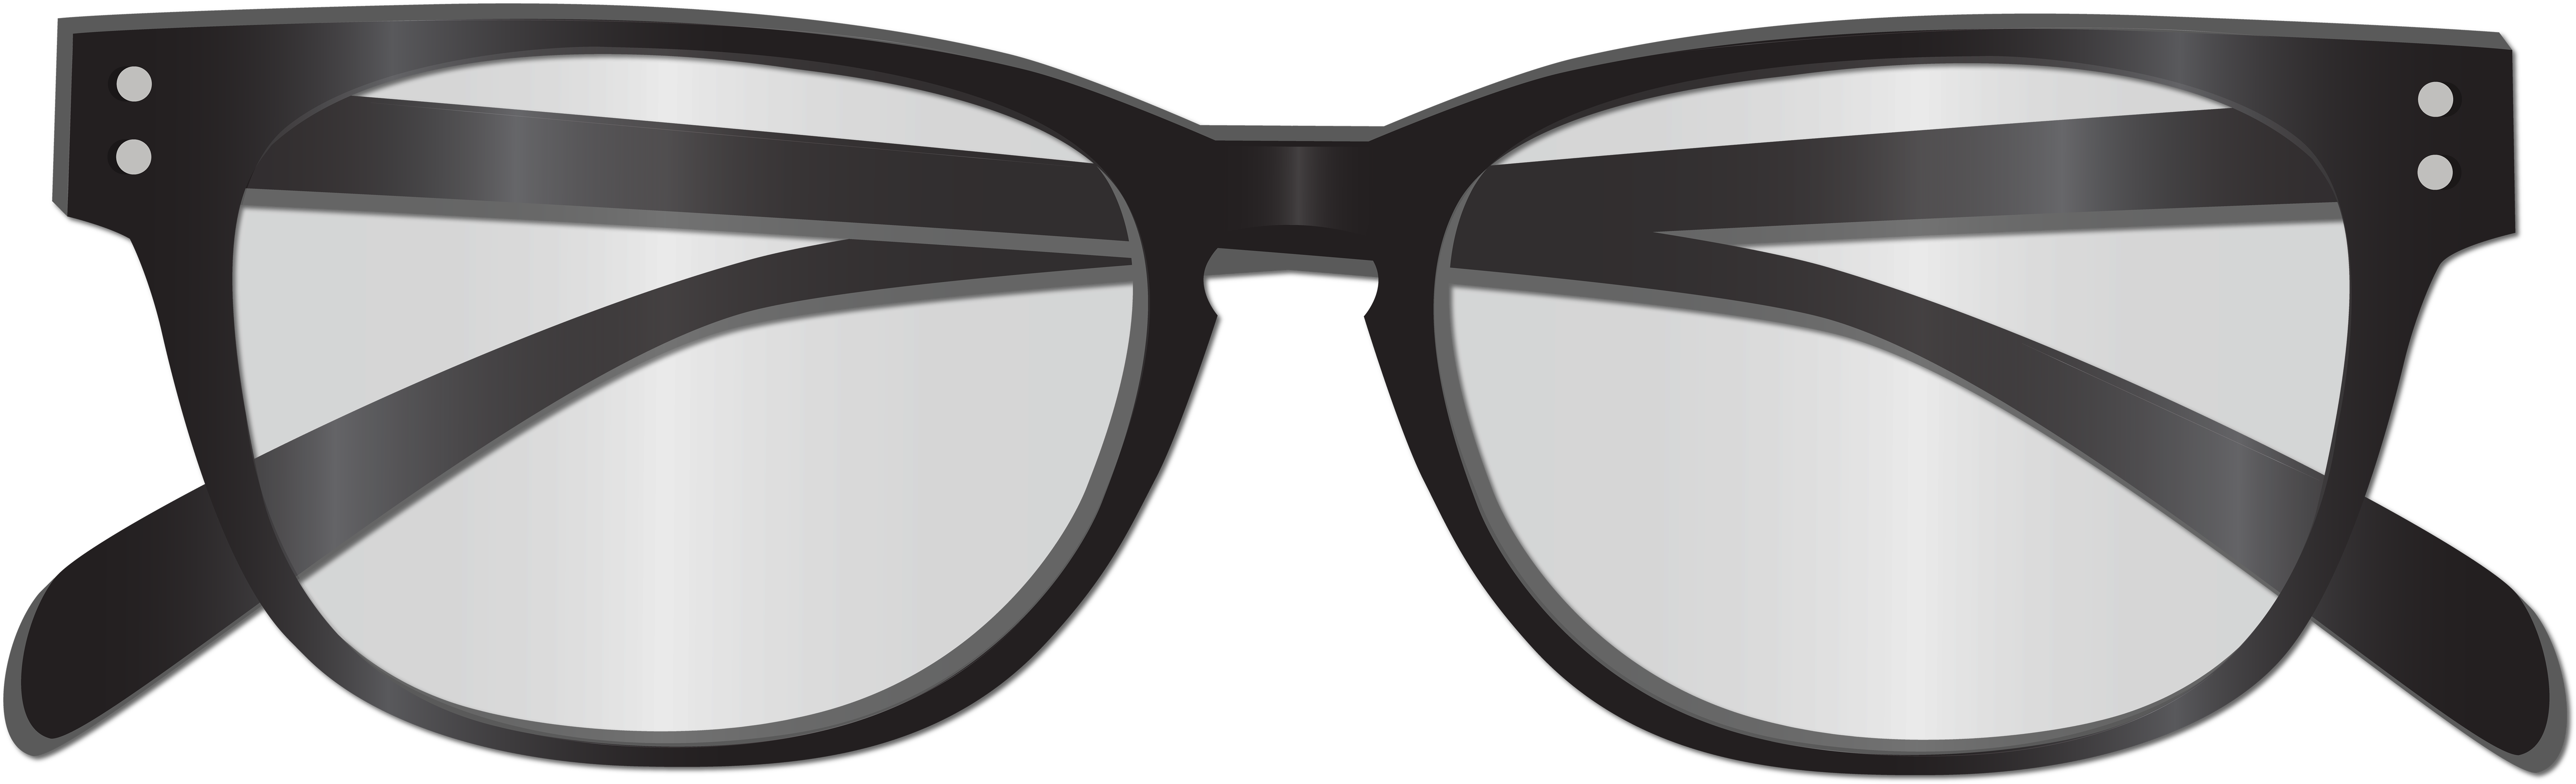 A Close Up Of A Pair Of Sunglasses